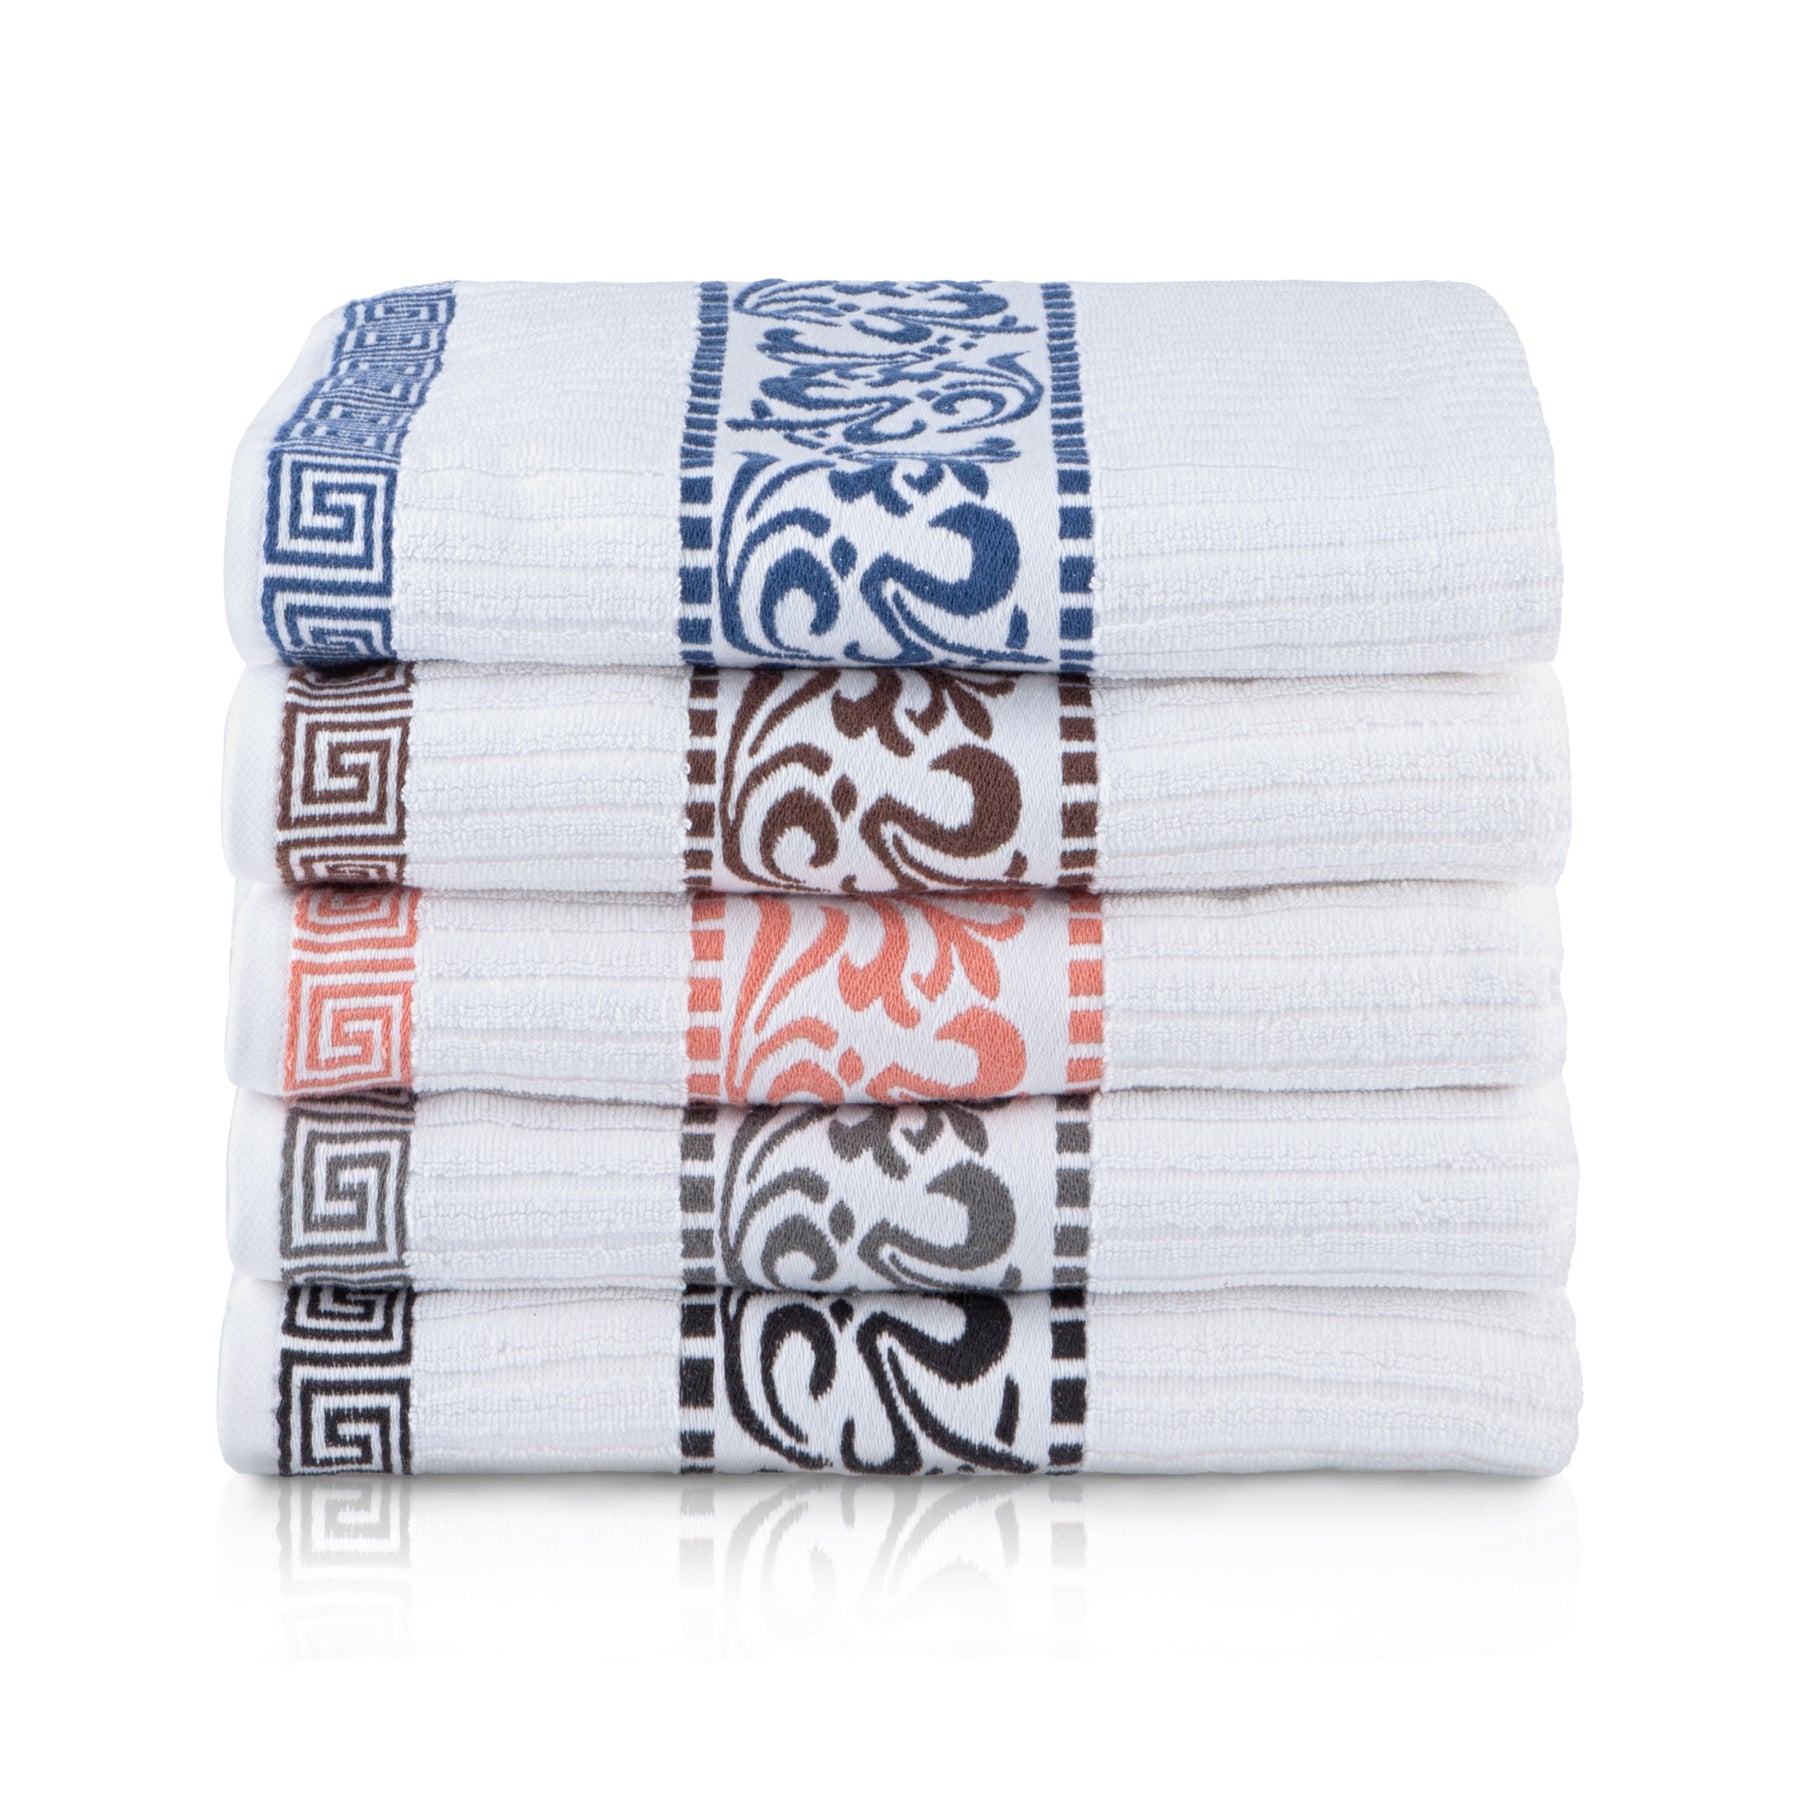 Superior Athens Cotton 8-Piece Towel Set with Greek Scroll and Floral Pattern - White-Navy